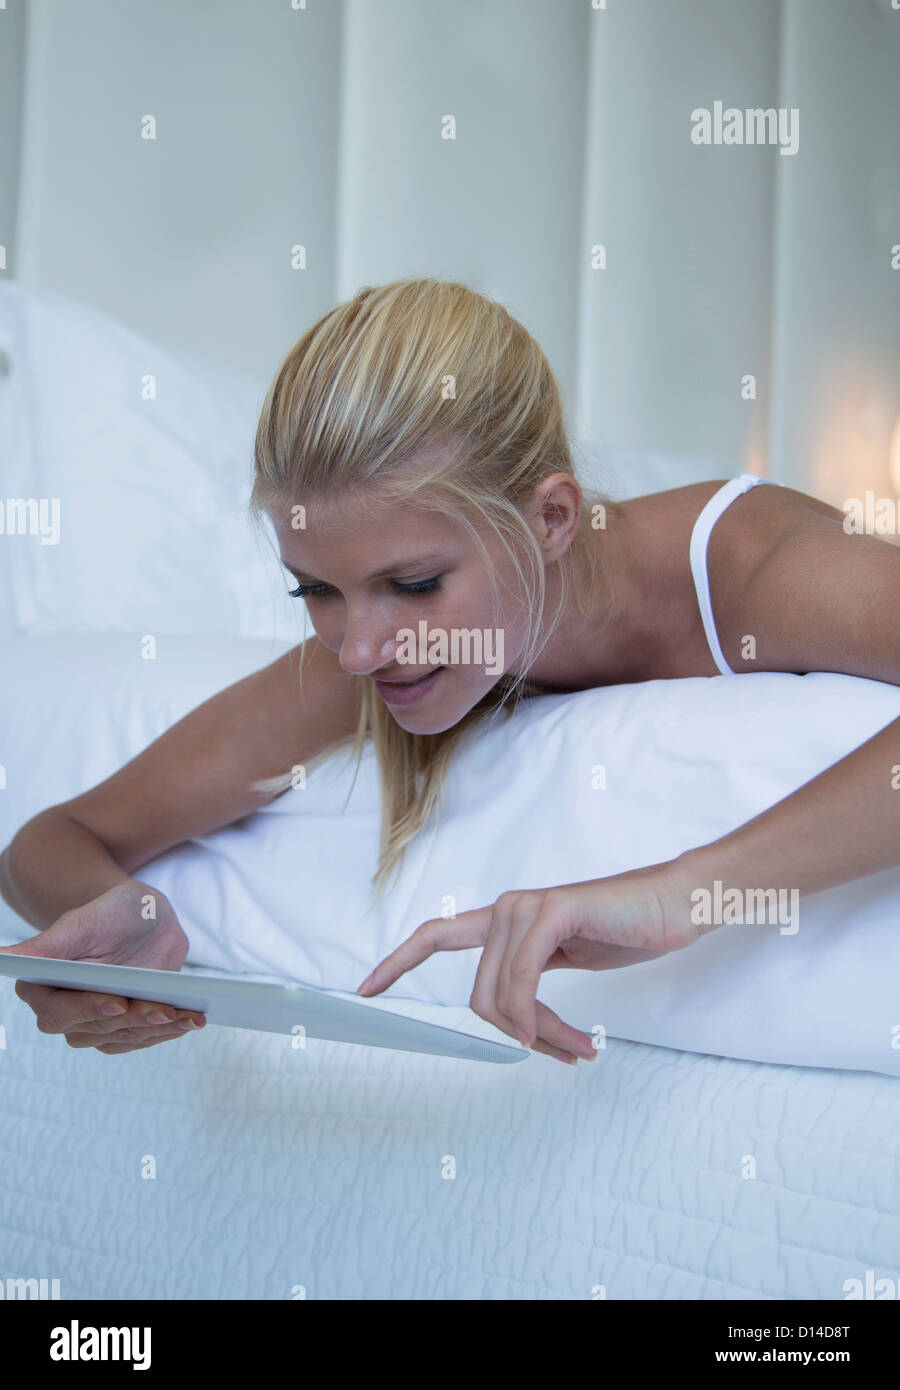 Woman using tablet computer on bed Banque D'Images